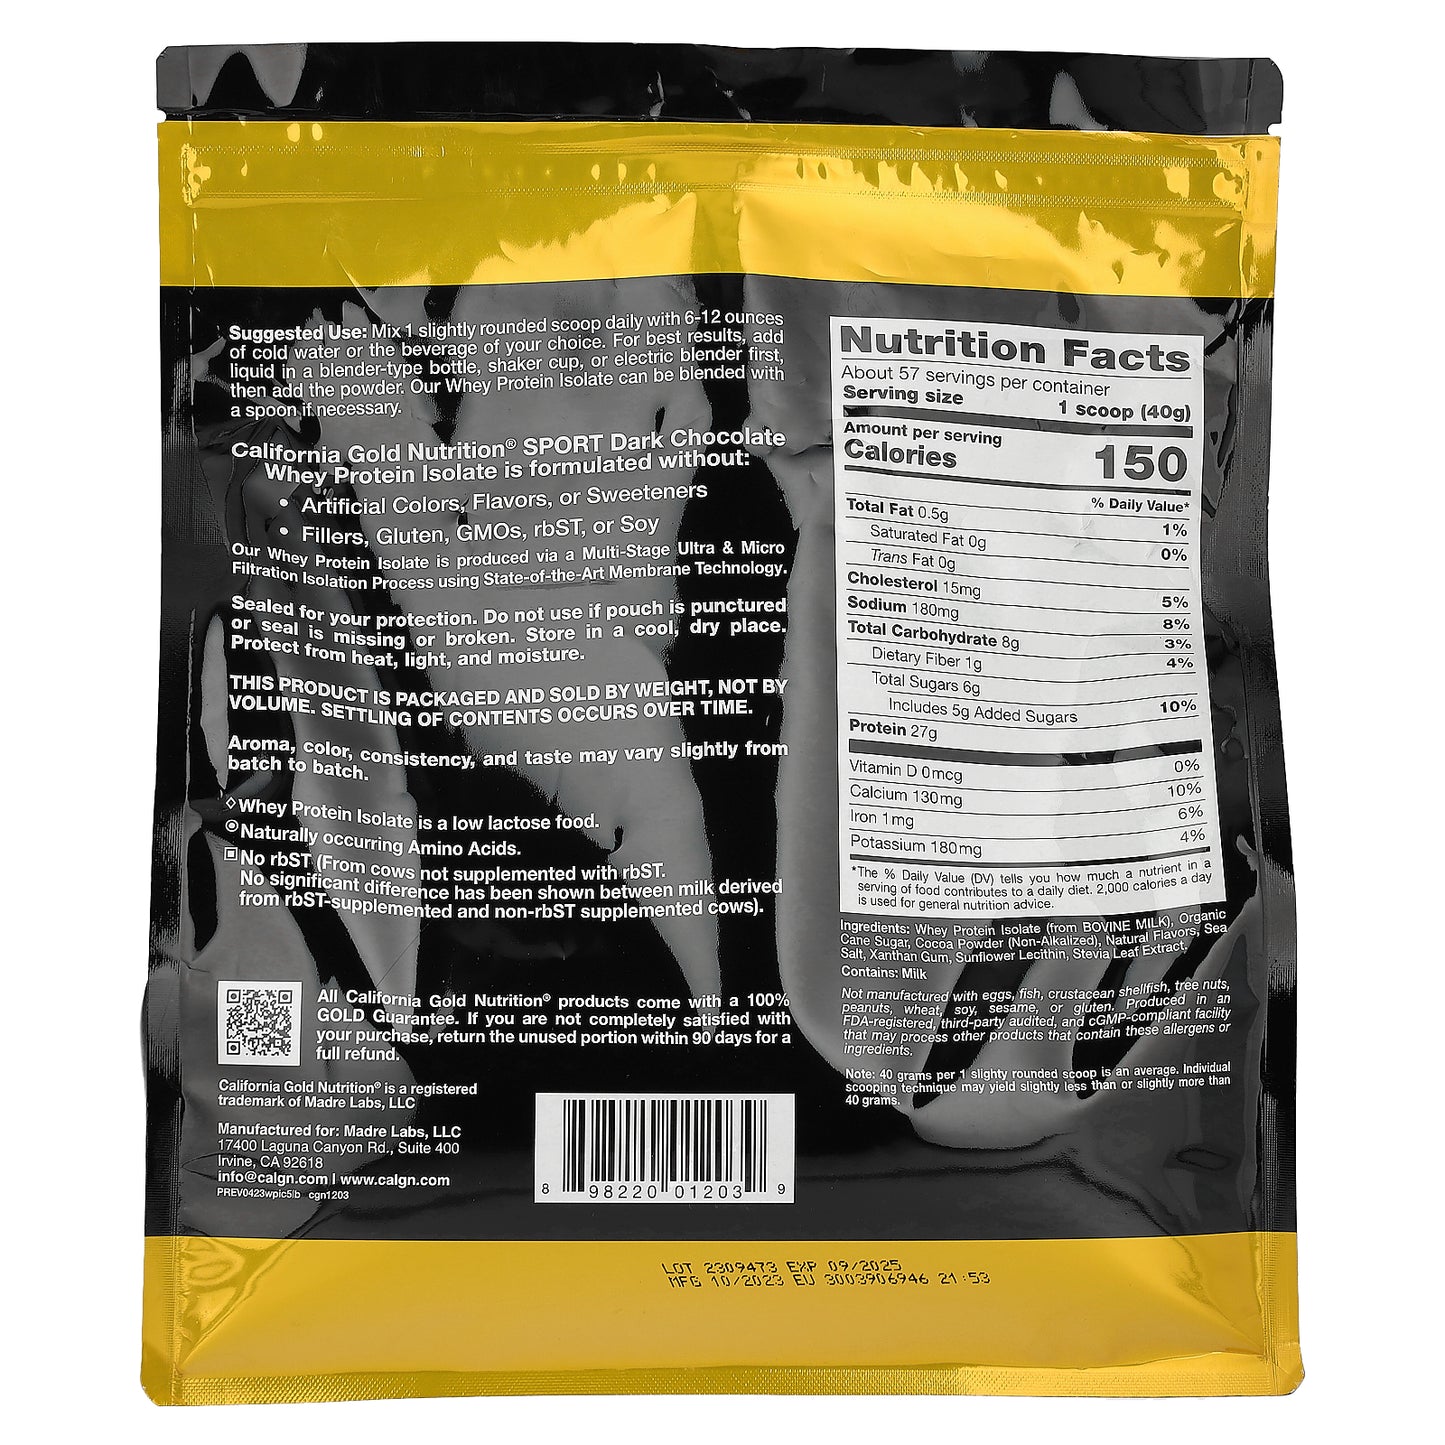 California Gold Nutrition, Sport, Dark Chocolate Whey Protein Isolate, 5 lb (2.27 kg)